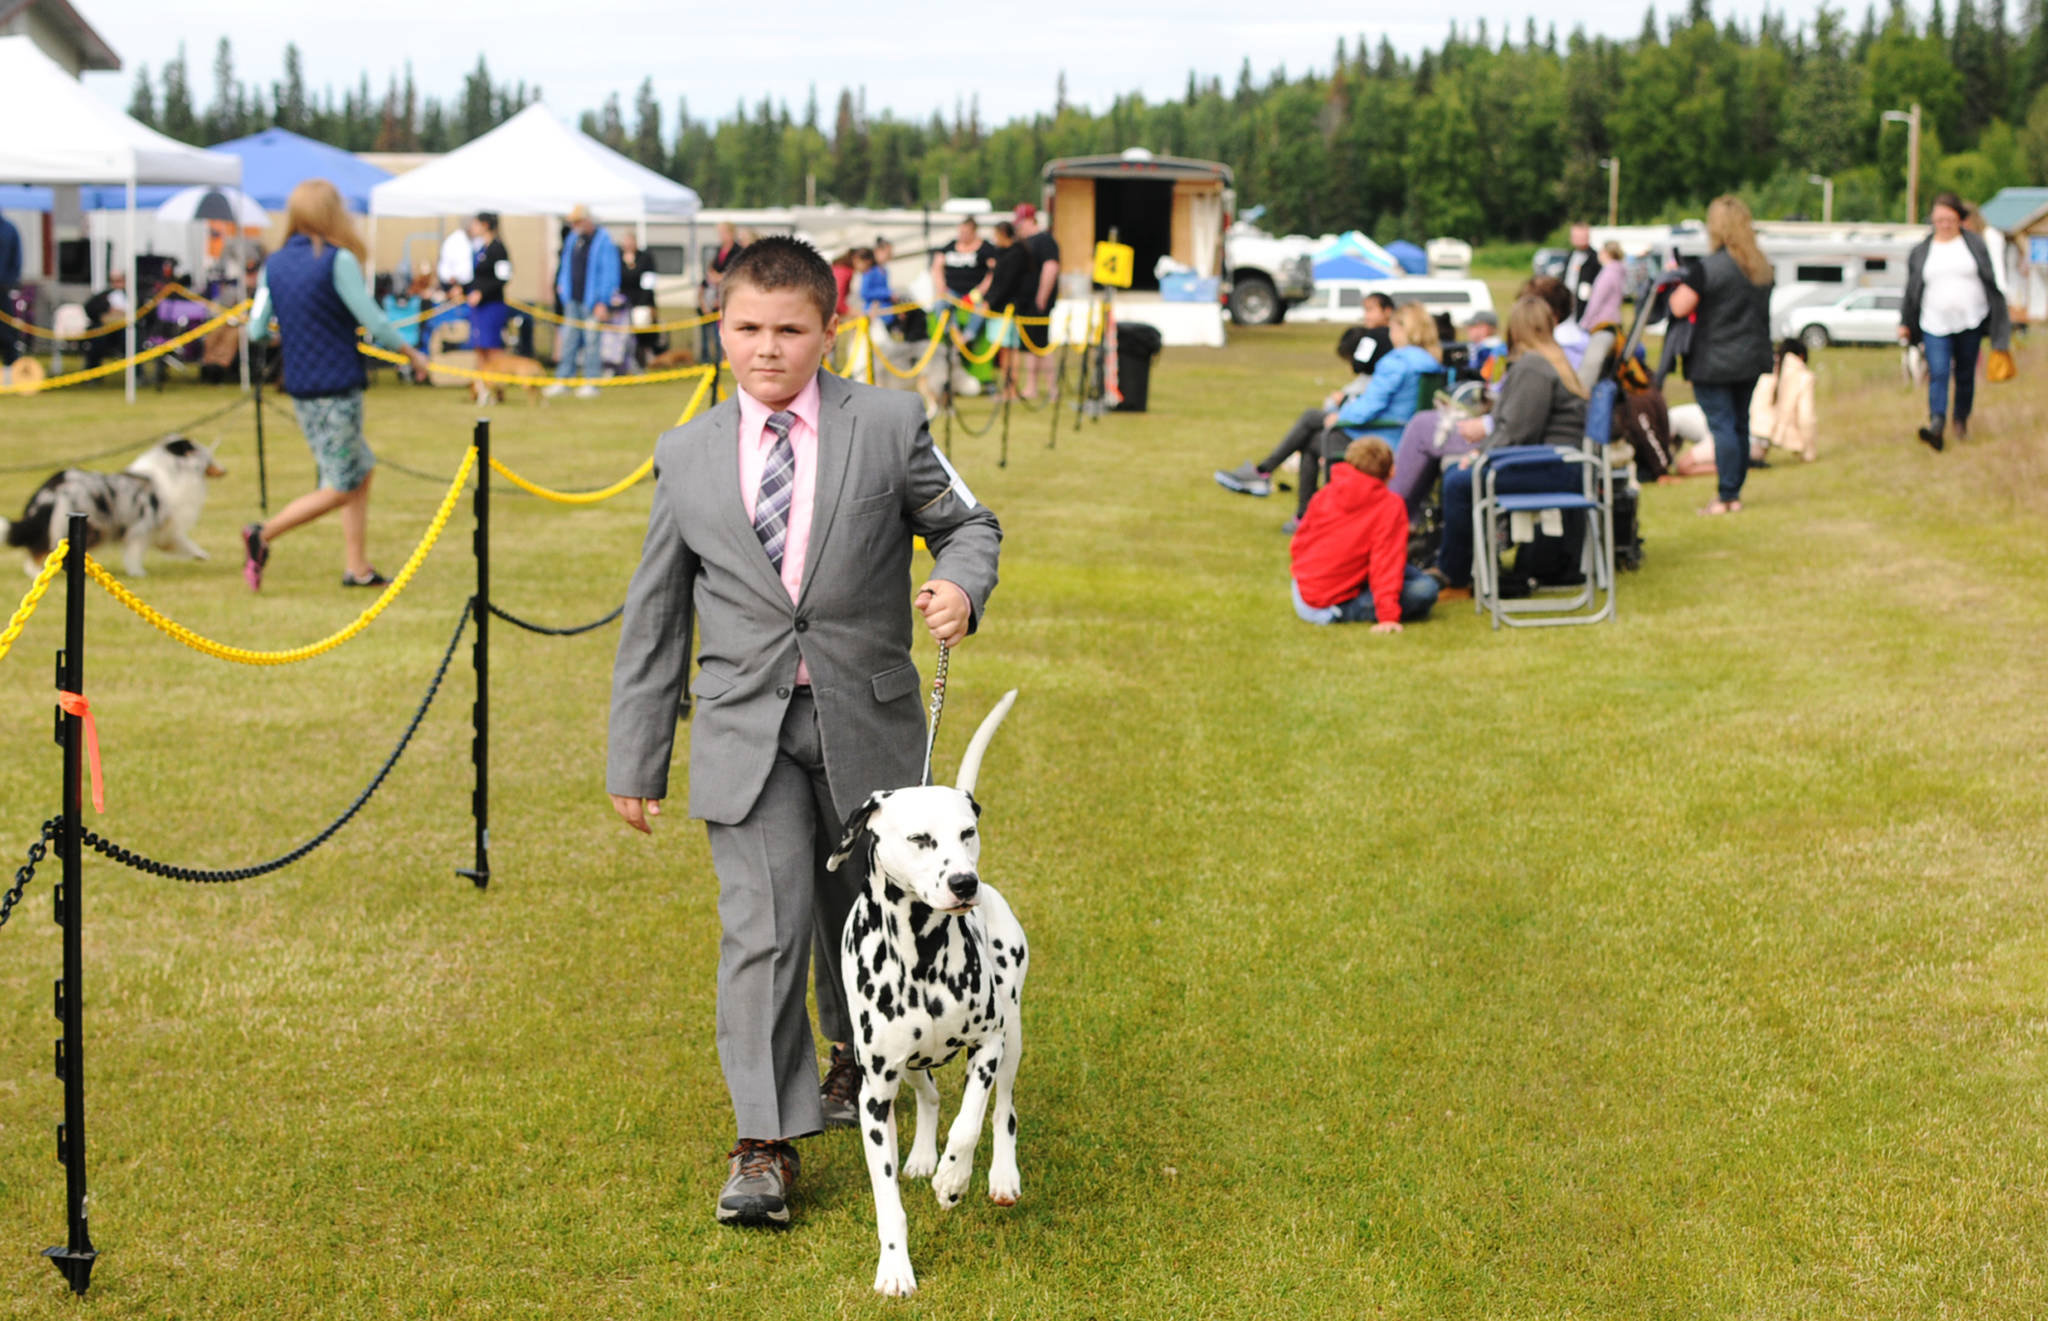 A trainer walks his Dalmation along the edge of the field at the Kenai Kennel Club’s annual dog show, obedience and agility trials on Saturday, July 14, 2018 in Soldotna, Alaska. Dog owners come from all over the state to take part in the events each year. (Photo by Elizabeth Earl/Peninsula Clarion)